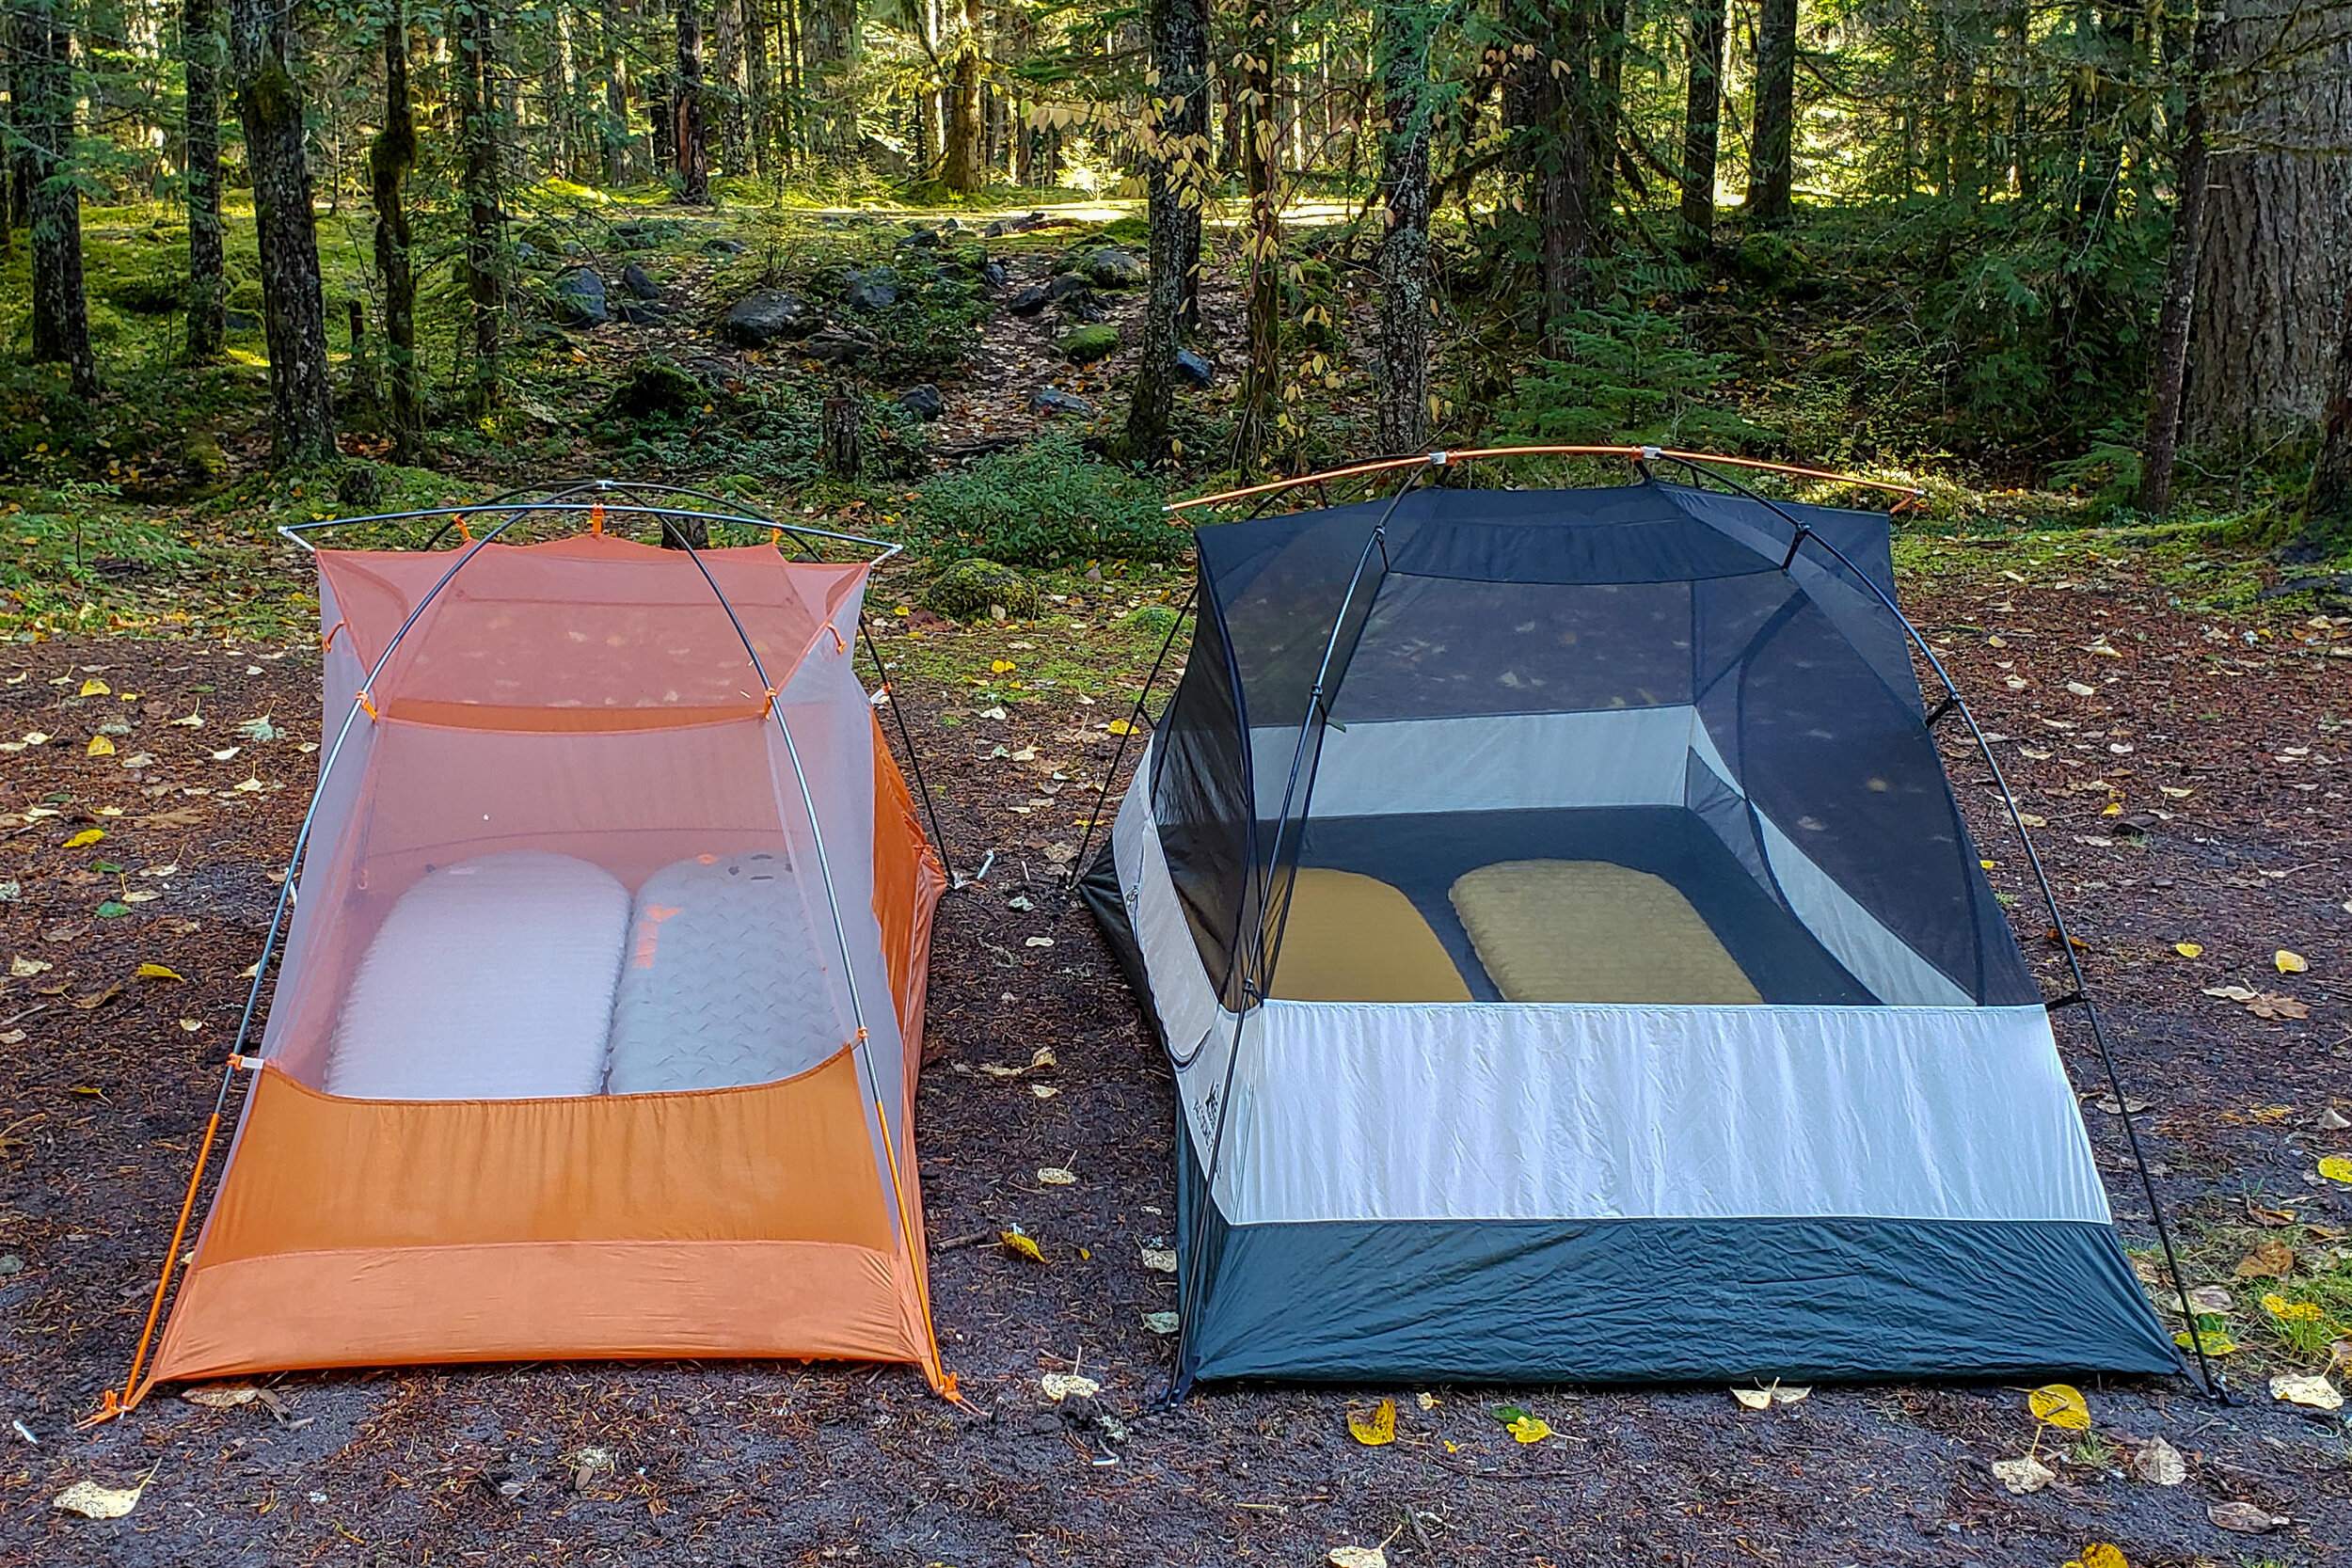 size comparison in copper spur hv ul 2 and rei half dome 2 plus. All pads are regular width.